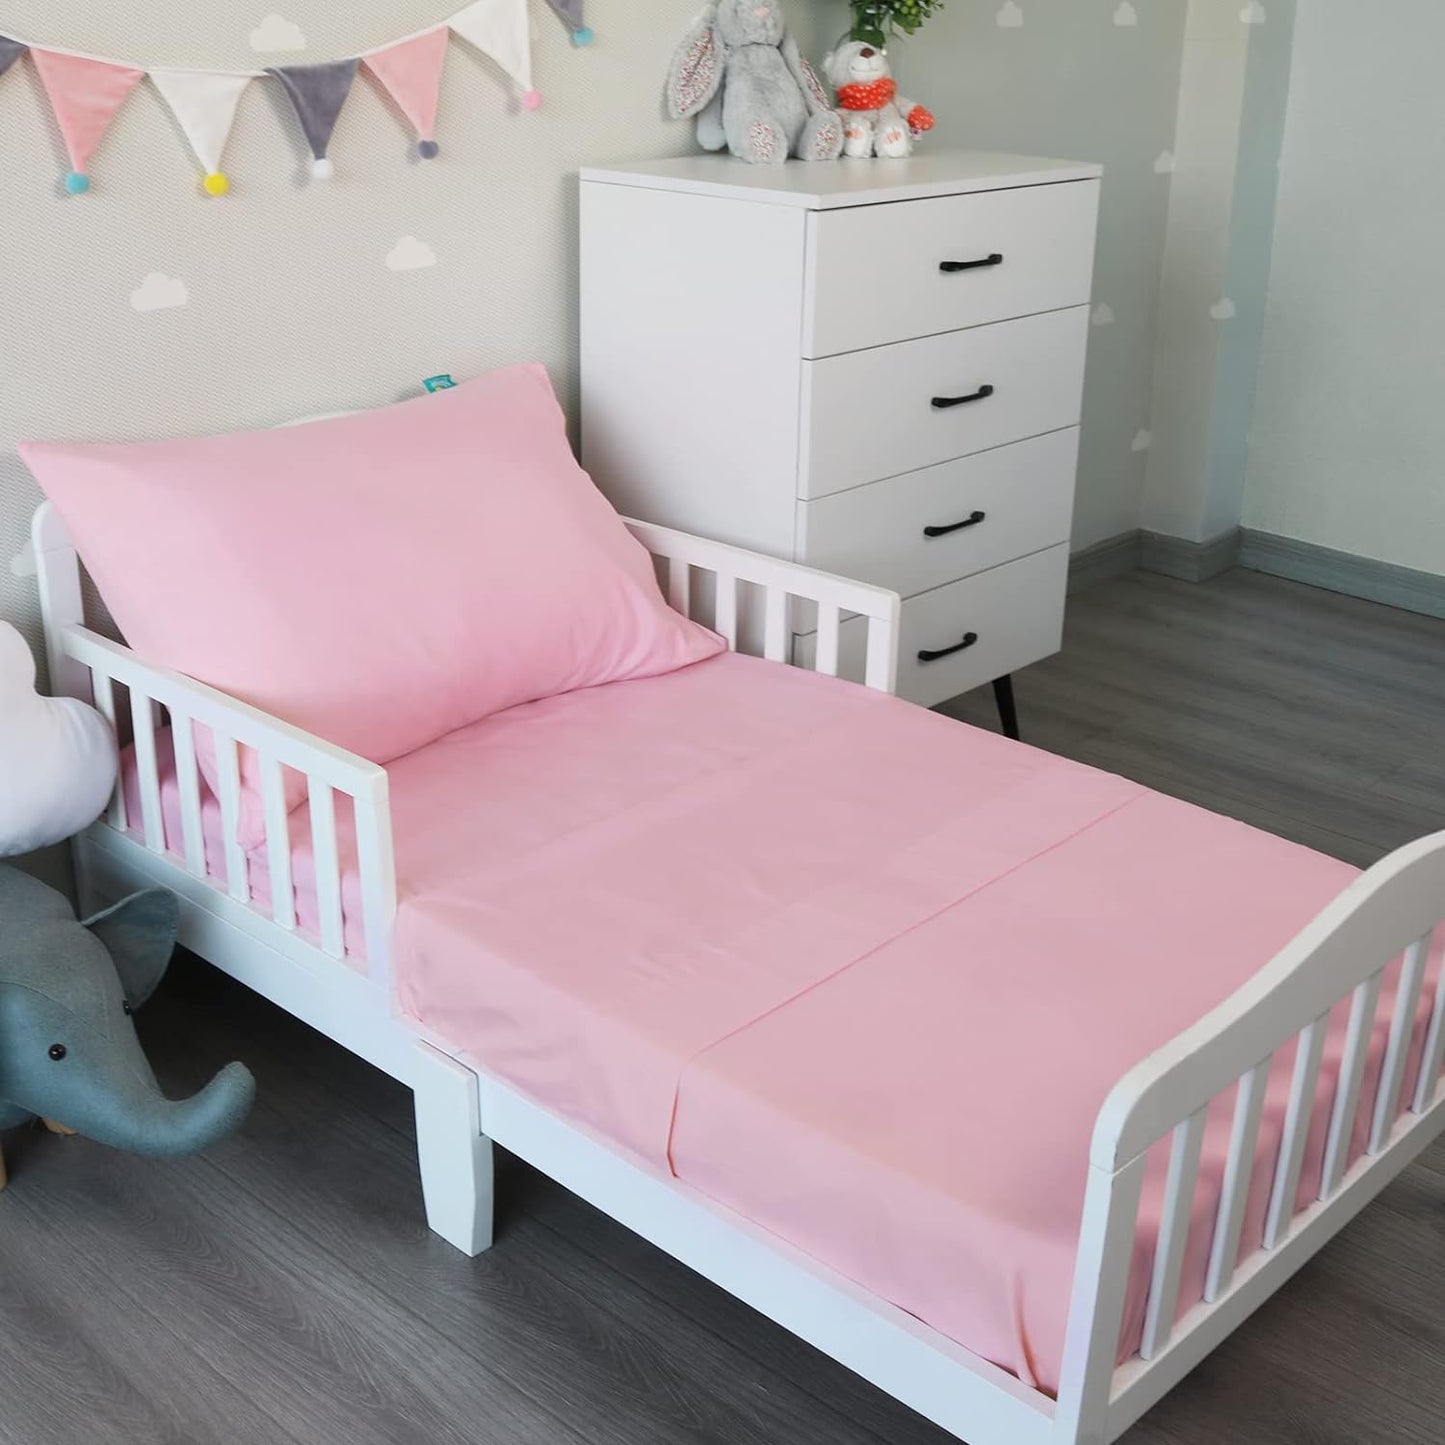 Toddler Bedding Set - 3 Pieces, Includes a Crib Fitted Sheet, Flat Sheet and Envelope Pillowcase, Soft and Breathable, Pink - Biloban Online Store